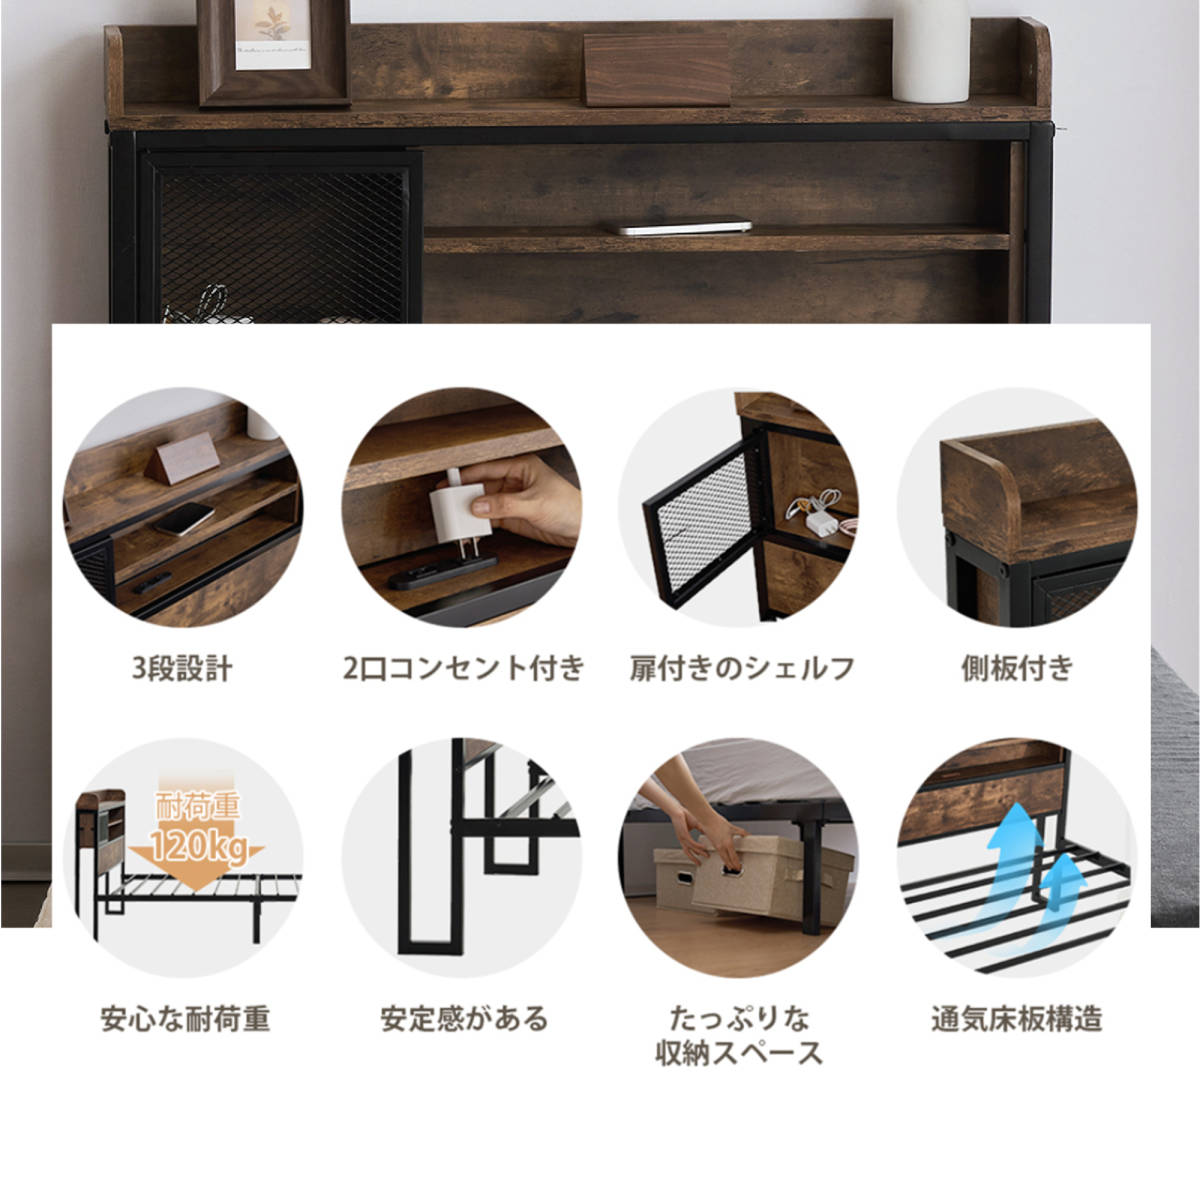  bed frame semi-double semi-double bed pipe bed outlet attaching . attaching tree outlet bed wooden under storage SD